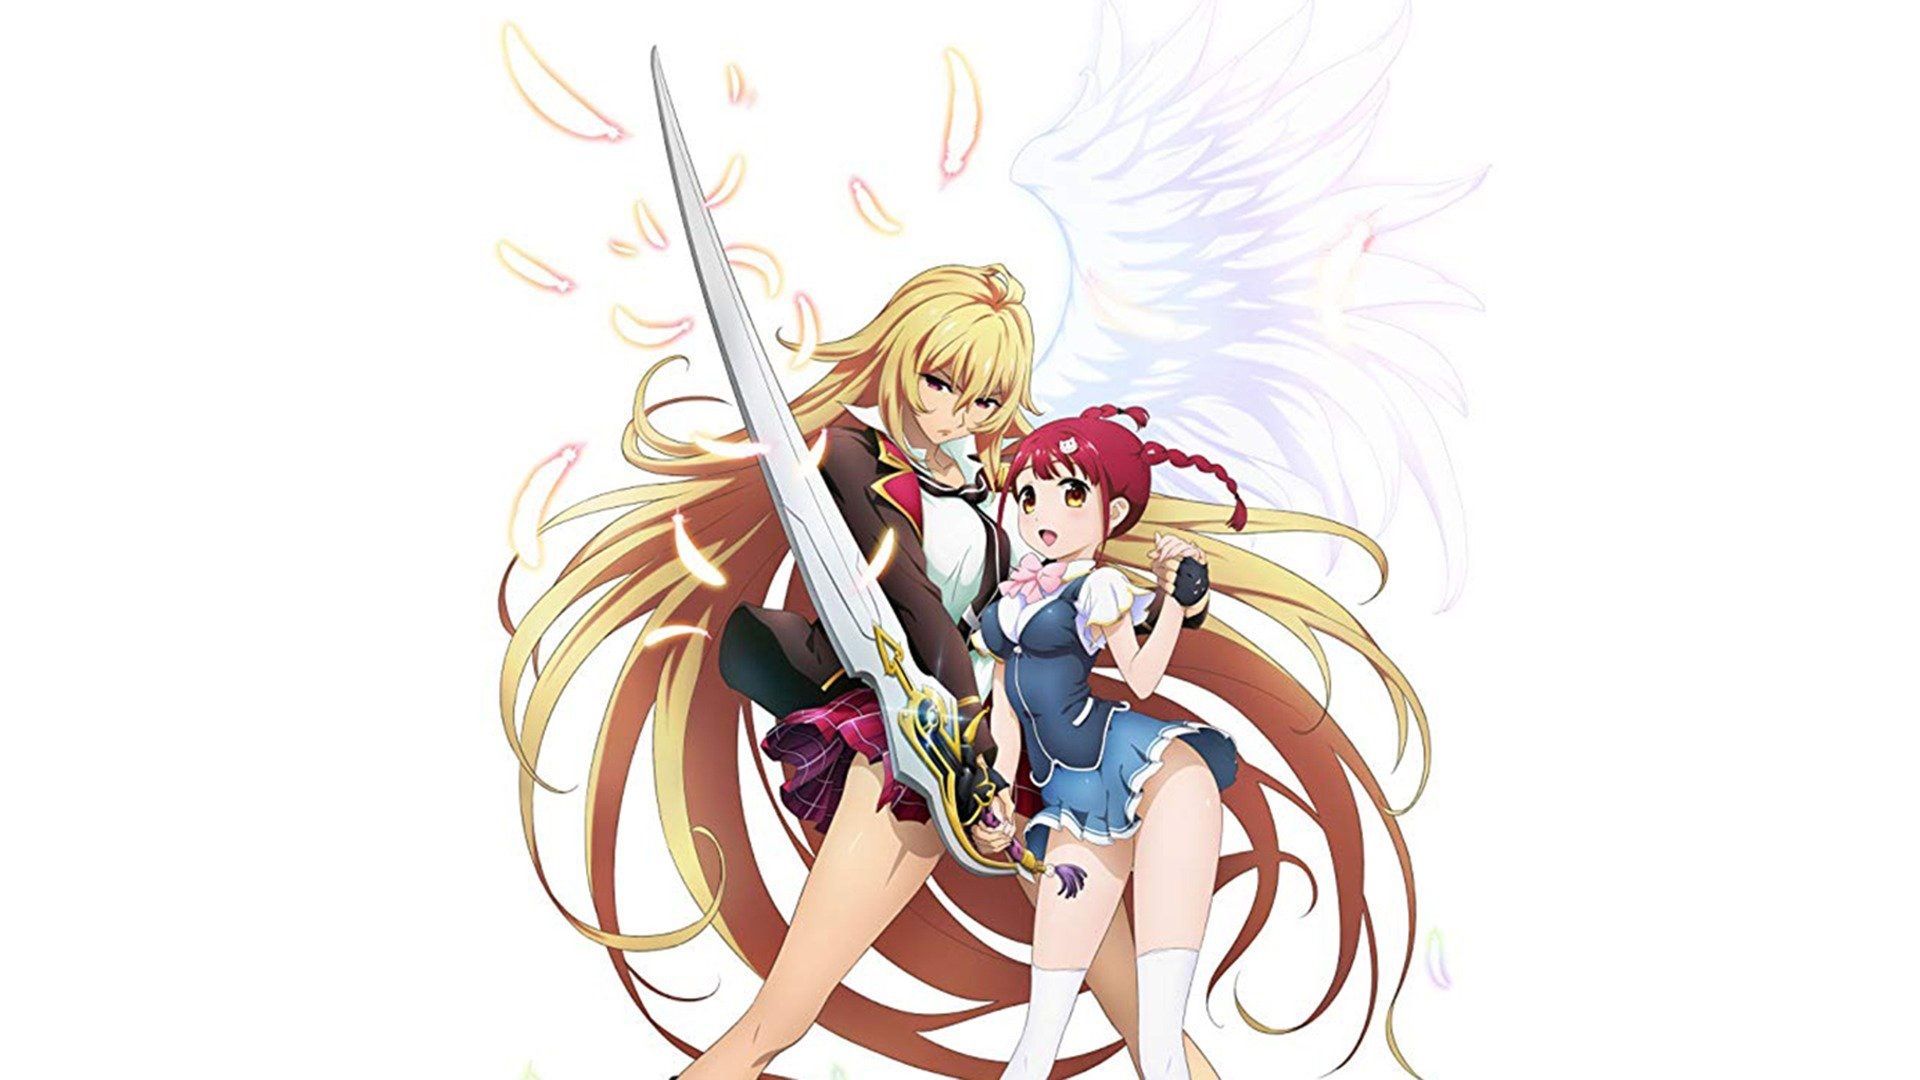 TV Time - Valkyrie Drive: Mermaid (TVShow Time)